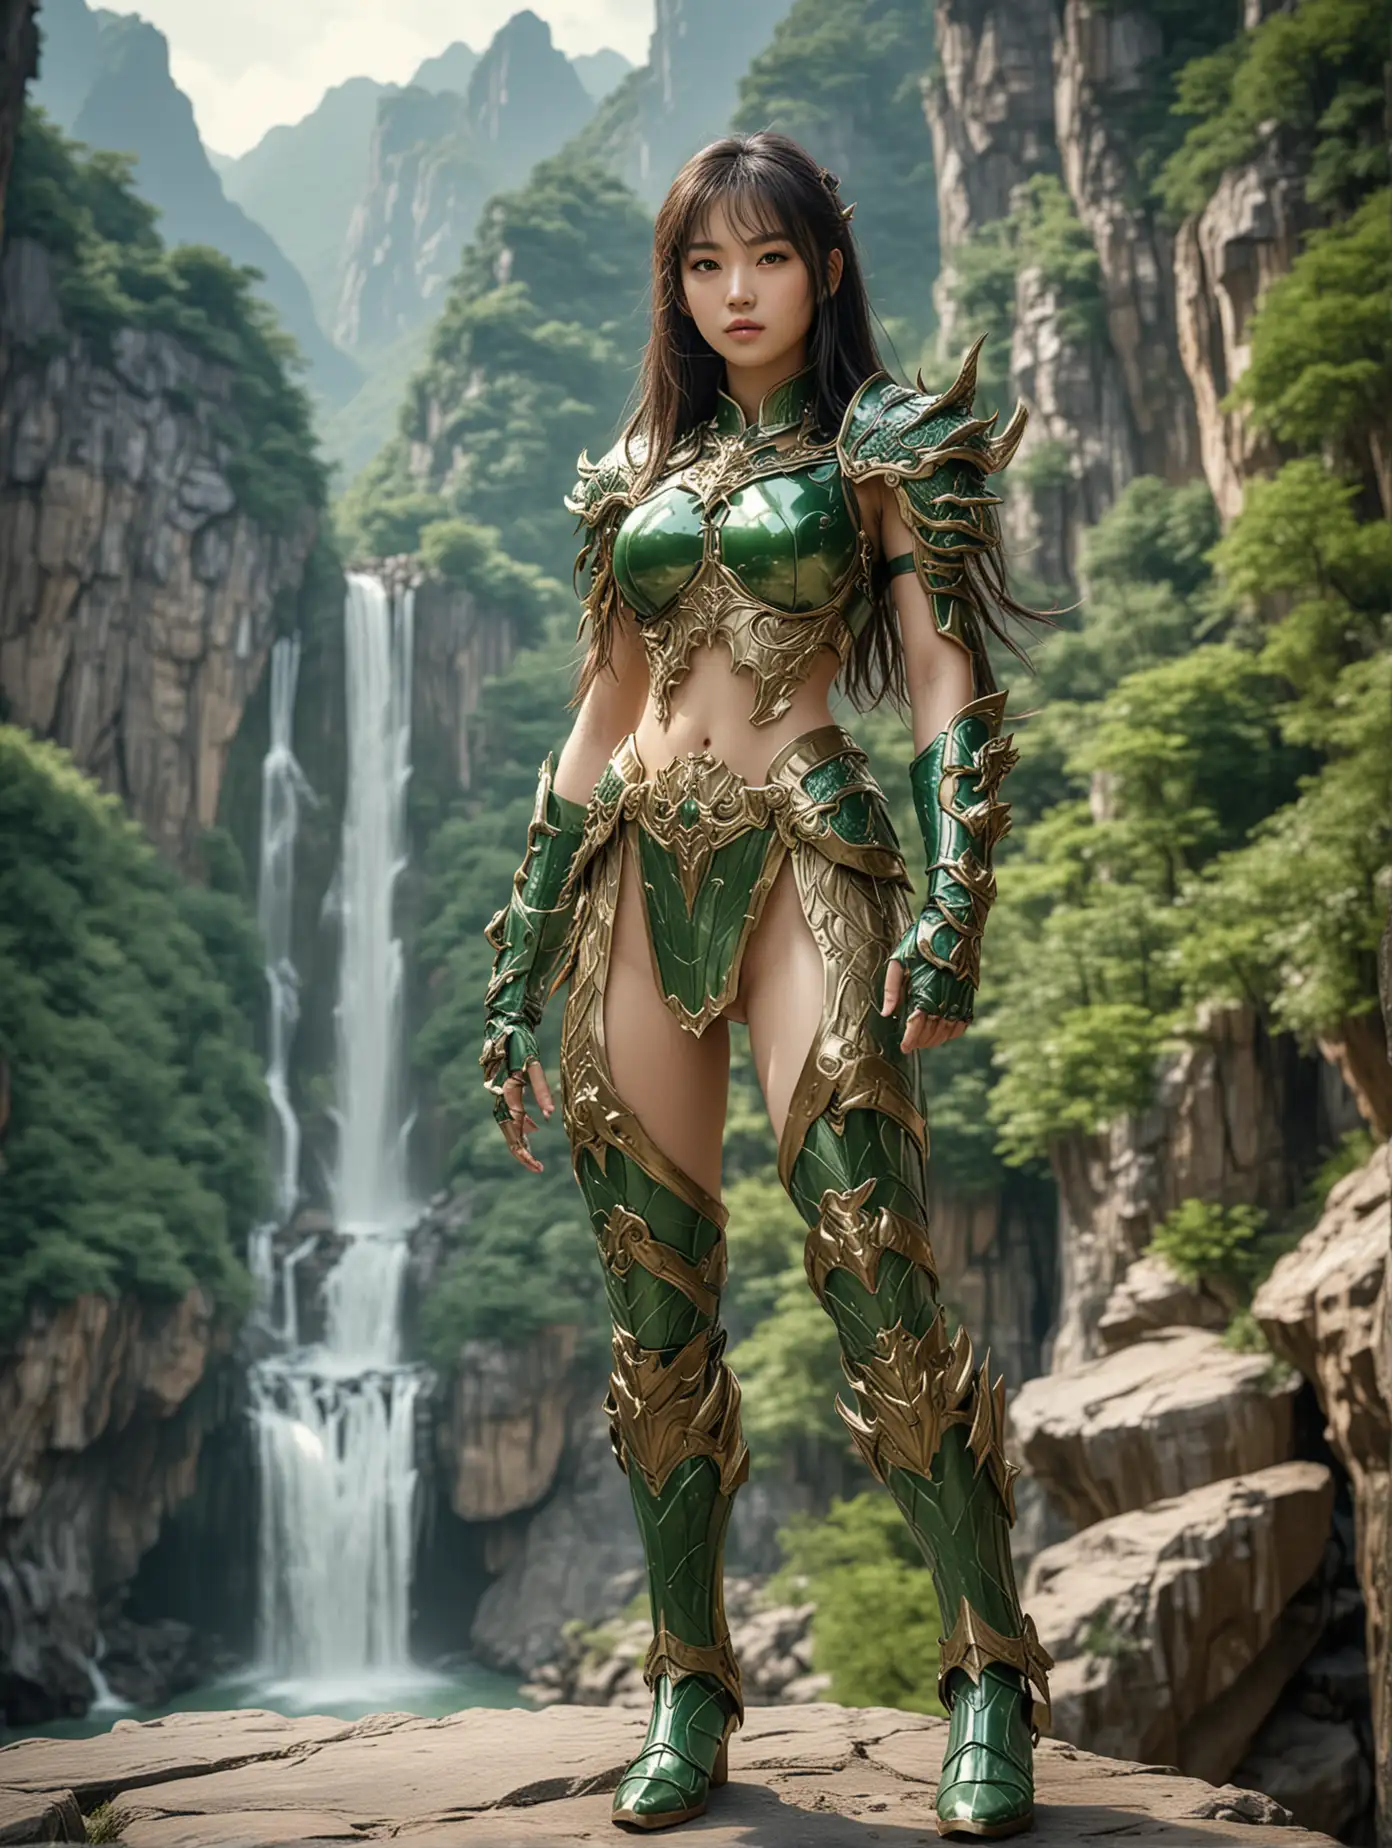 Powerful Chinese Warrior Woman Amidst Natural Splendor